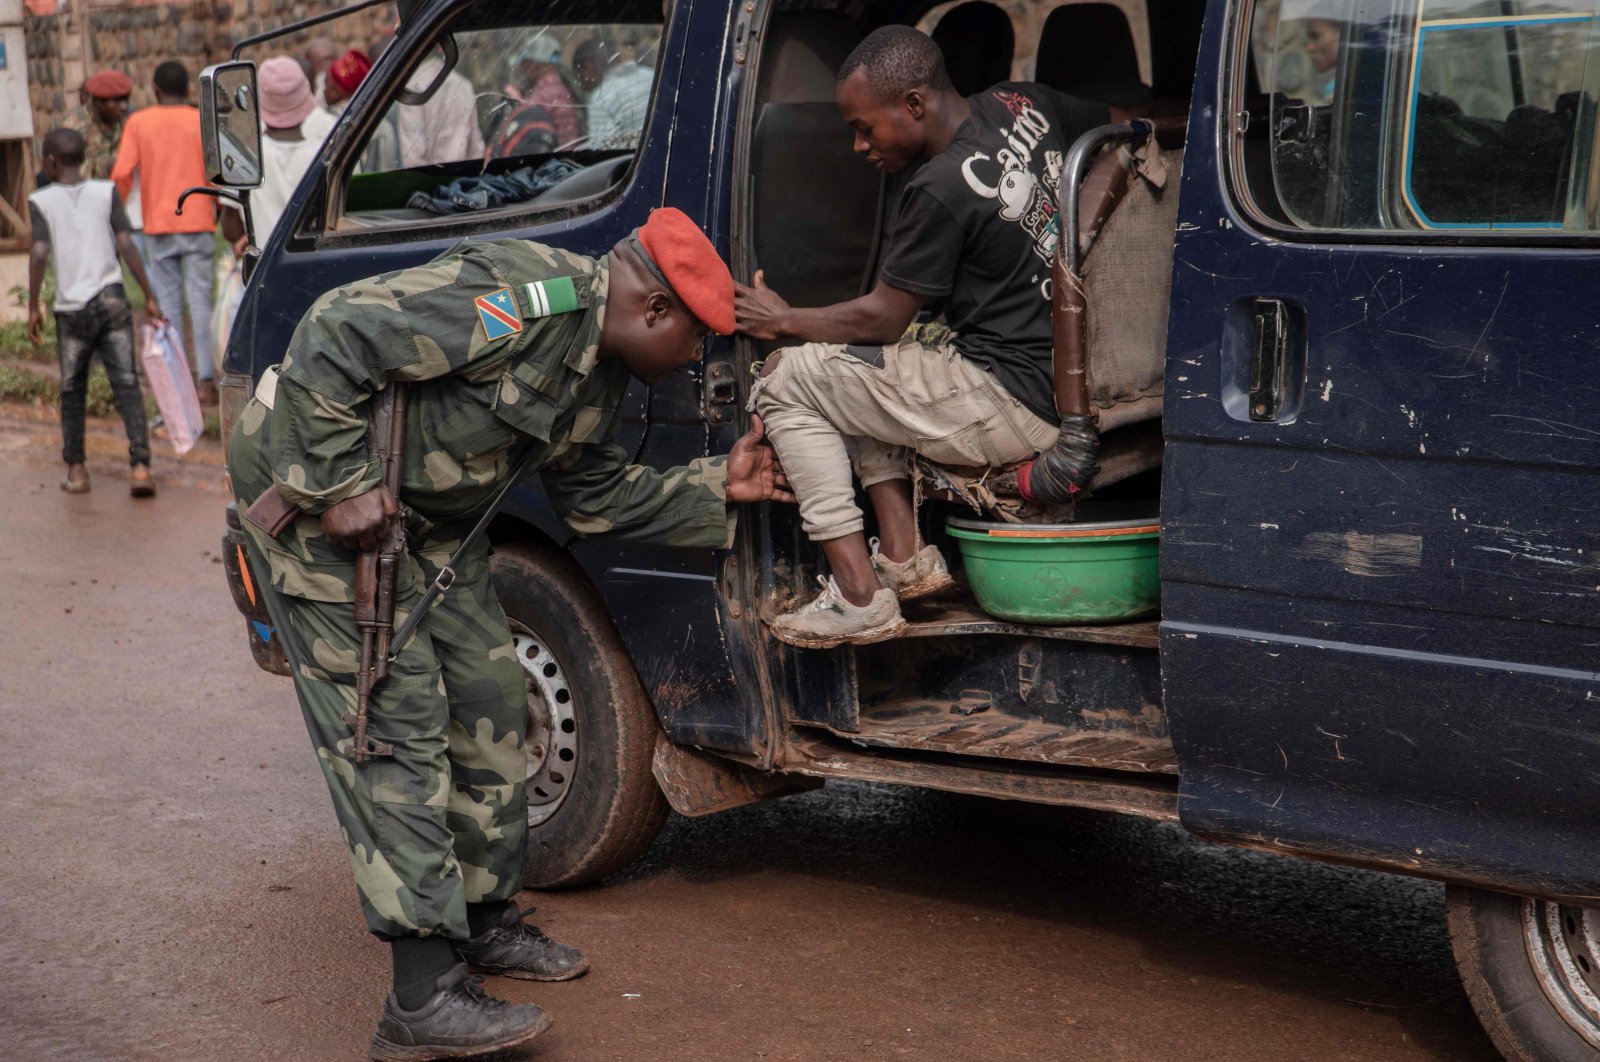 Soldiers check cars entering and leaving the town, the day after a rebel group raided the city of Bukavu, DR Congo, Nov. 4, 2021. (AFP Photo)